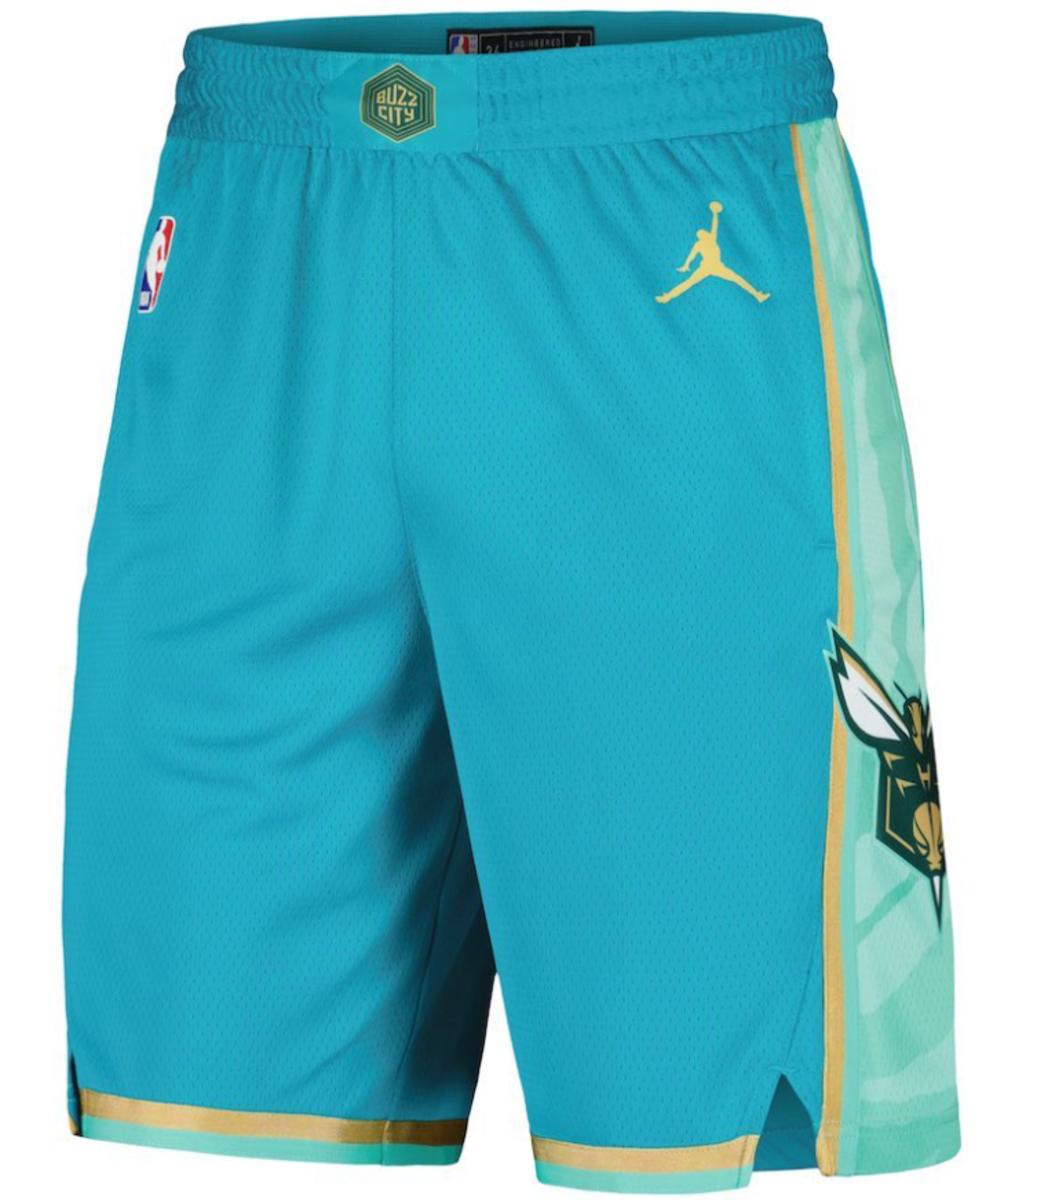 Rumored Hornets City Edition Shorts for 23-24